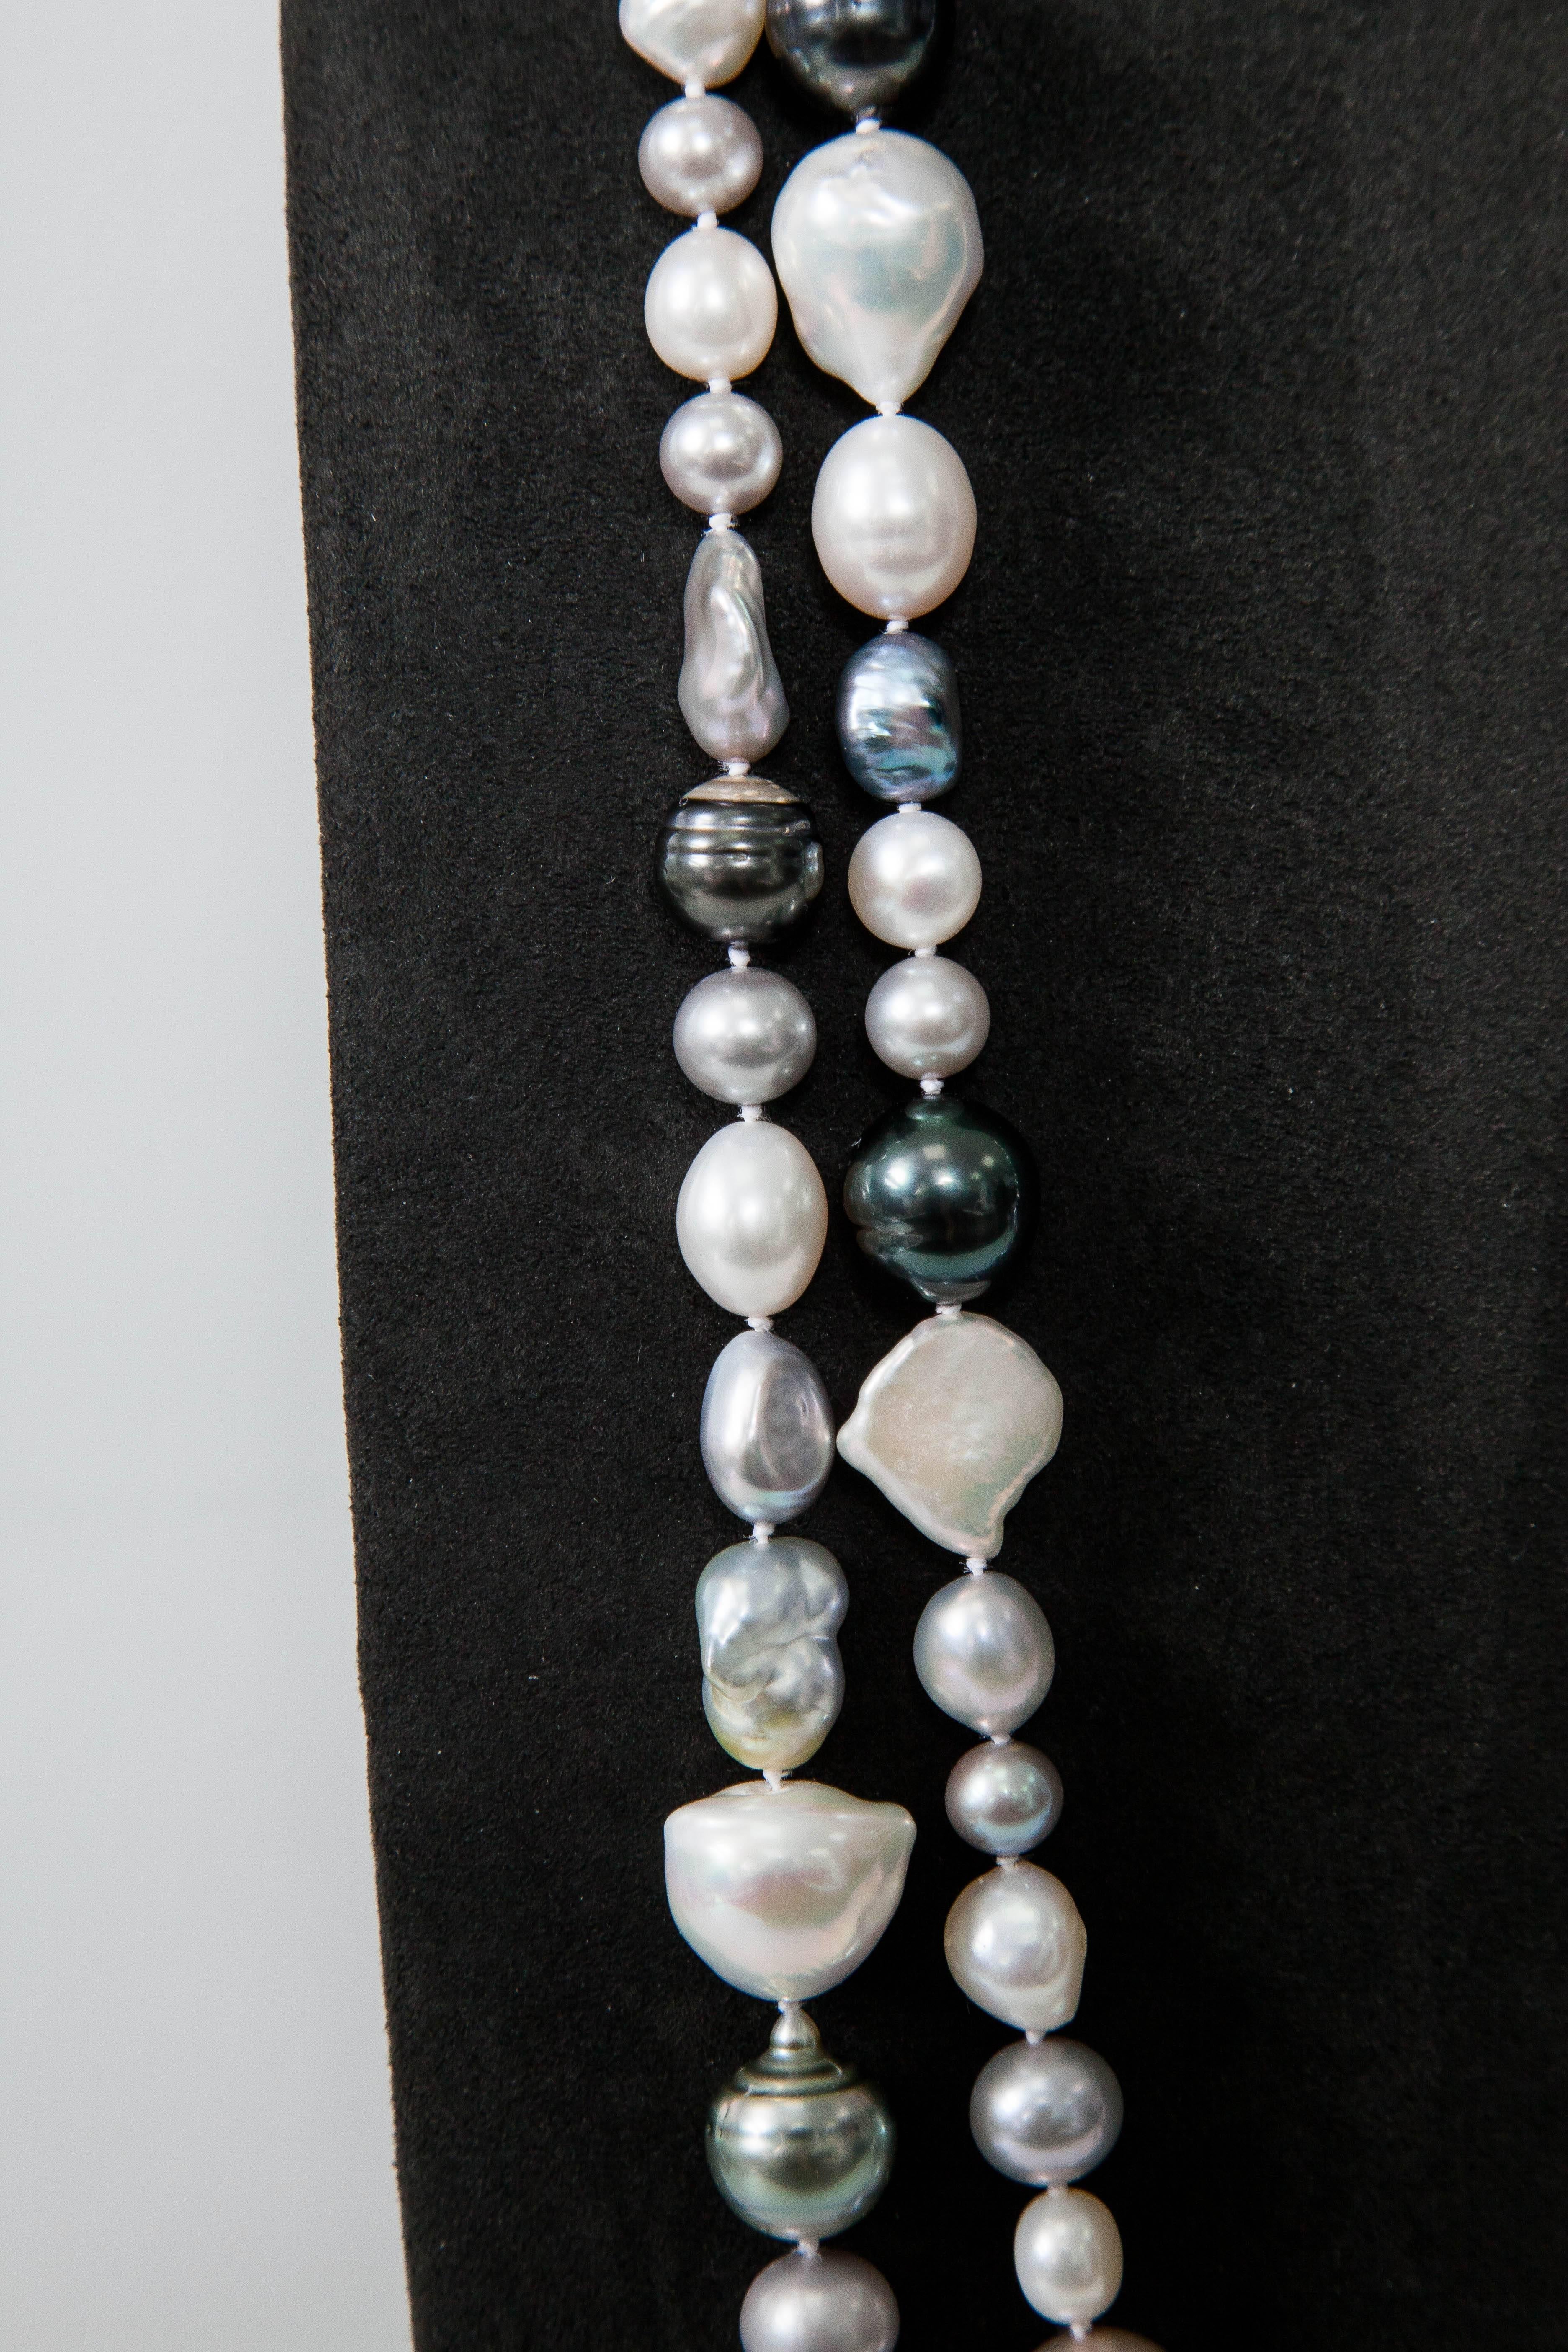 This fun,classy necklace features a mixture of Tahitian,Freshwater and South Sea Pearls.The length of the necklace is 72 "
The pearl size is between 7mm to 15mm White and black grey tones all shapes.